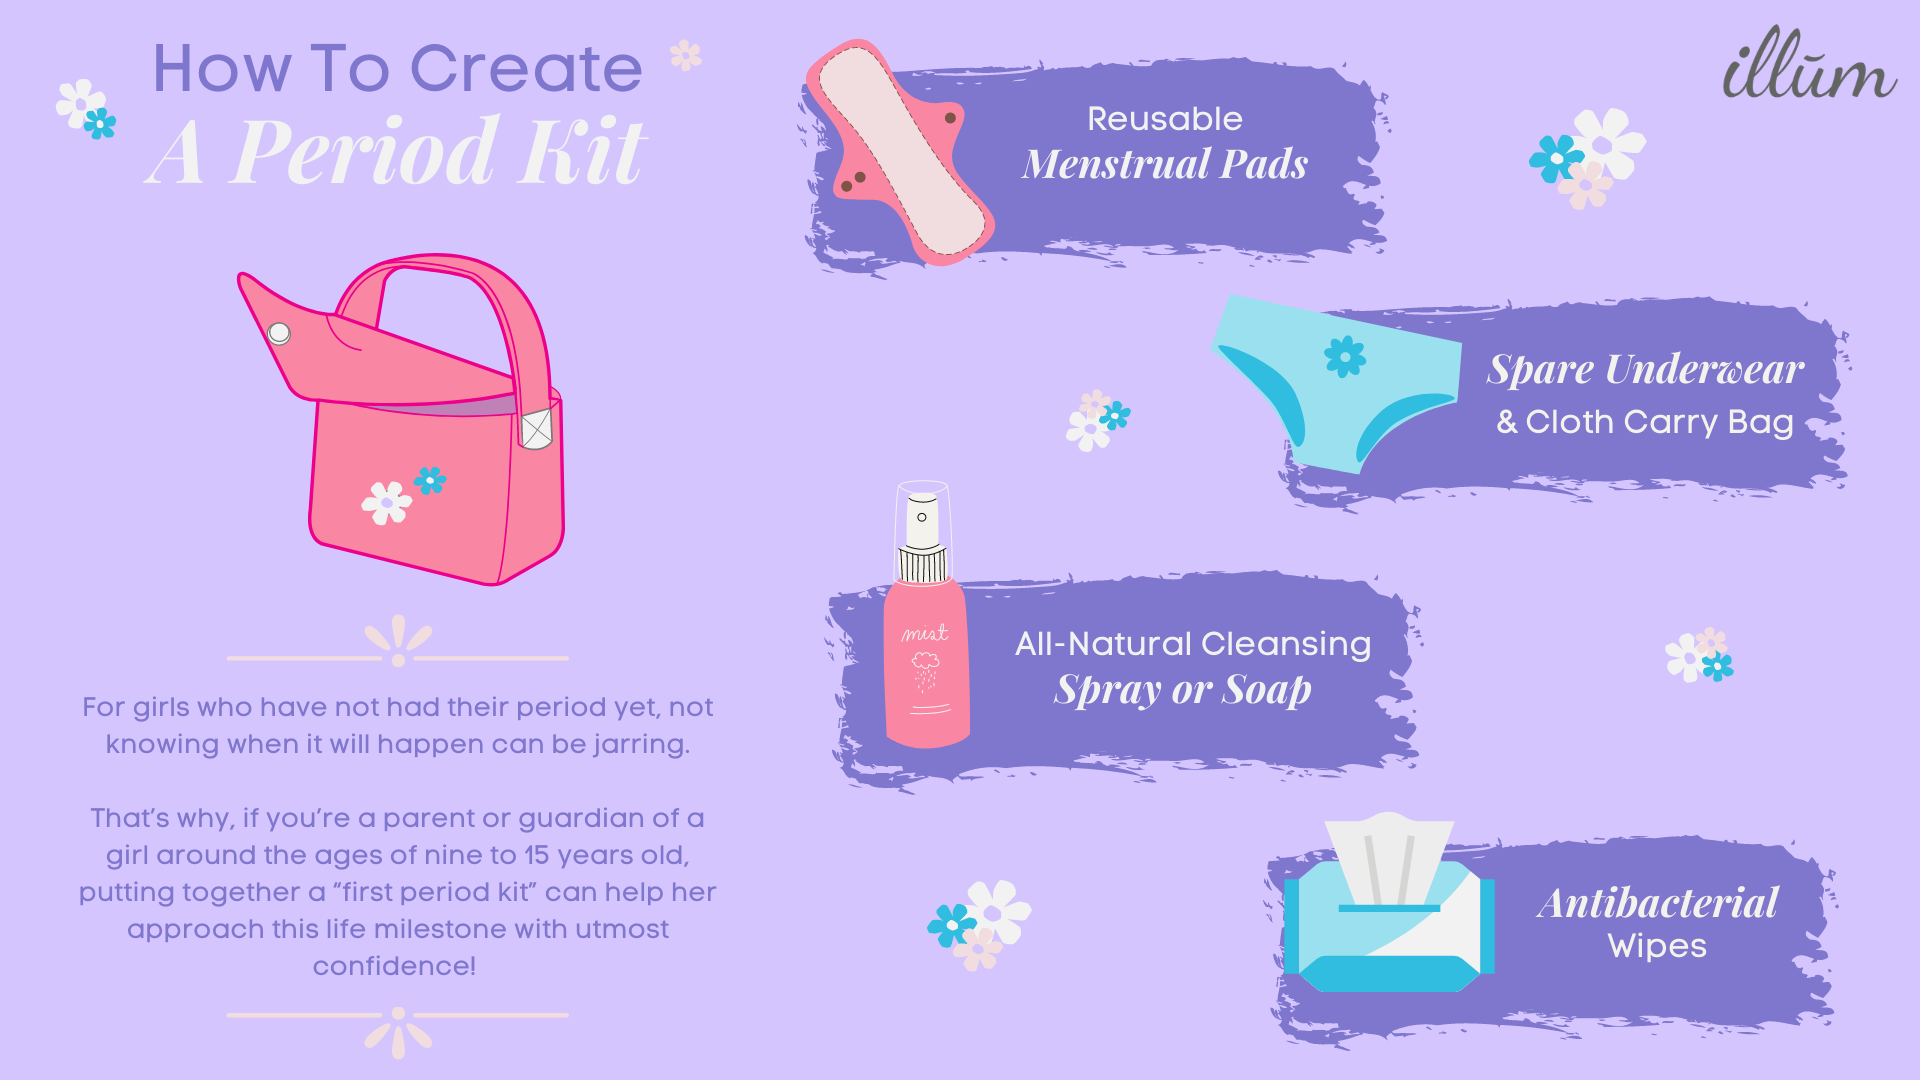 Infographic on how to create a period kit